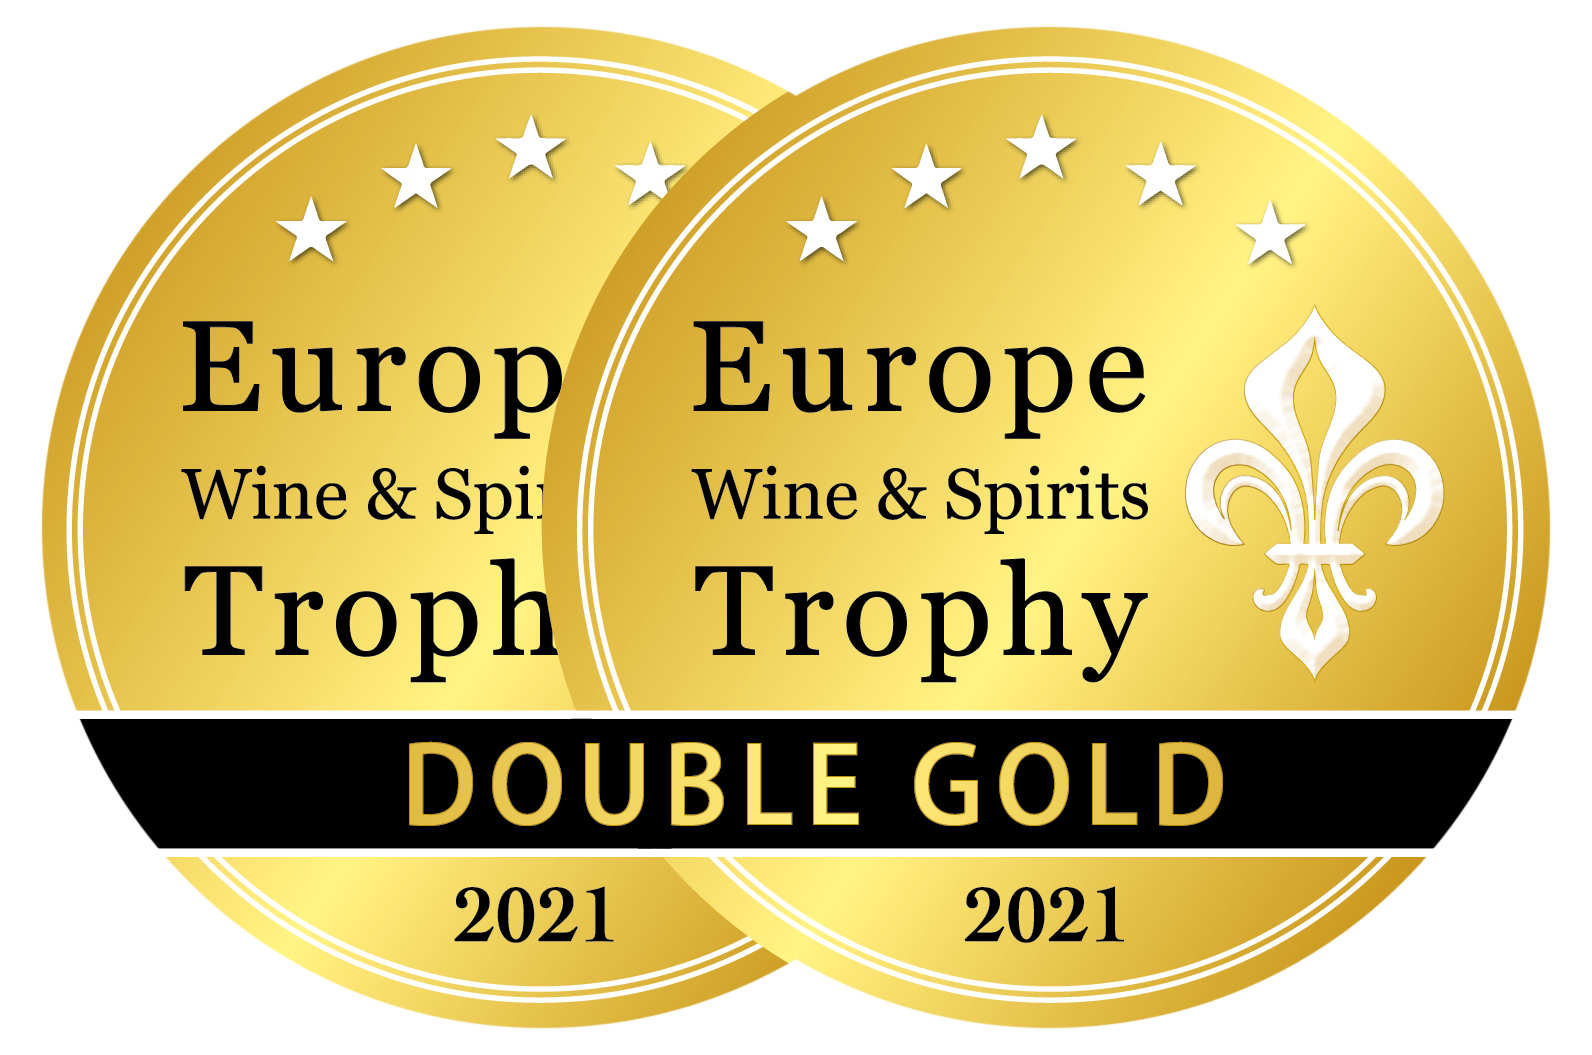 Europe Wine & Spirits Trophy Double Gold 2021 Badge 02